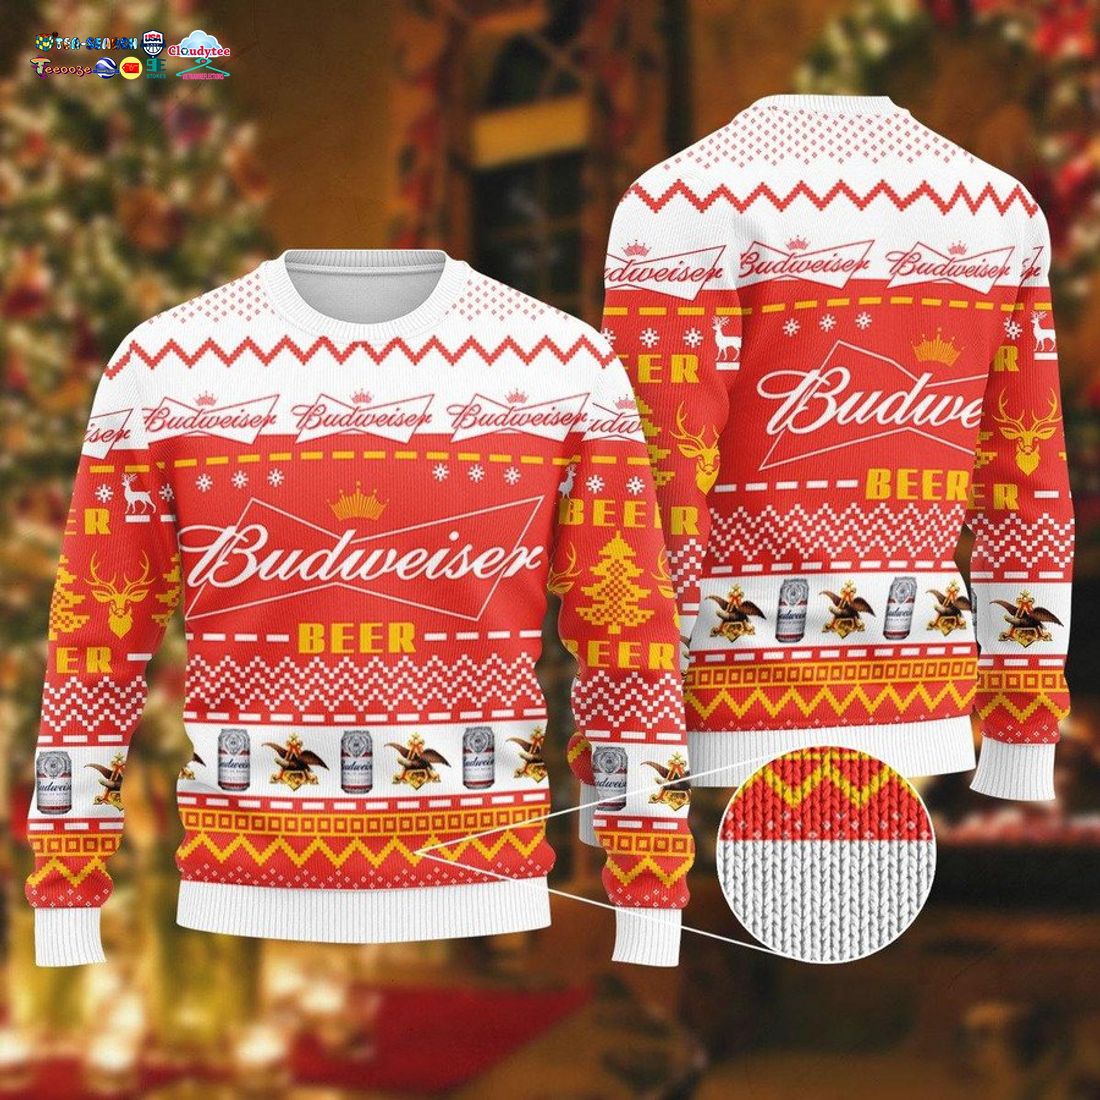 Budweiser Orange Ugly Christmas Sweater - Natural and awesome